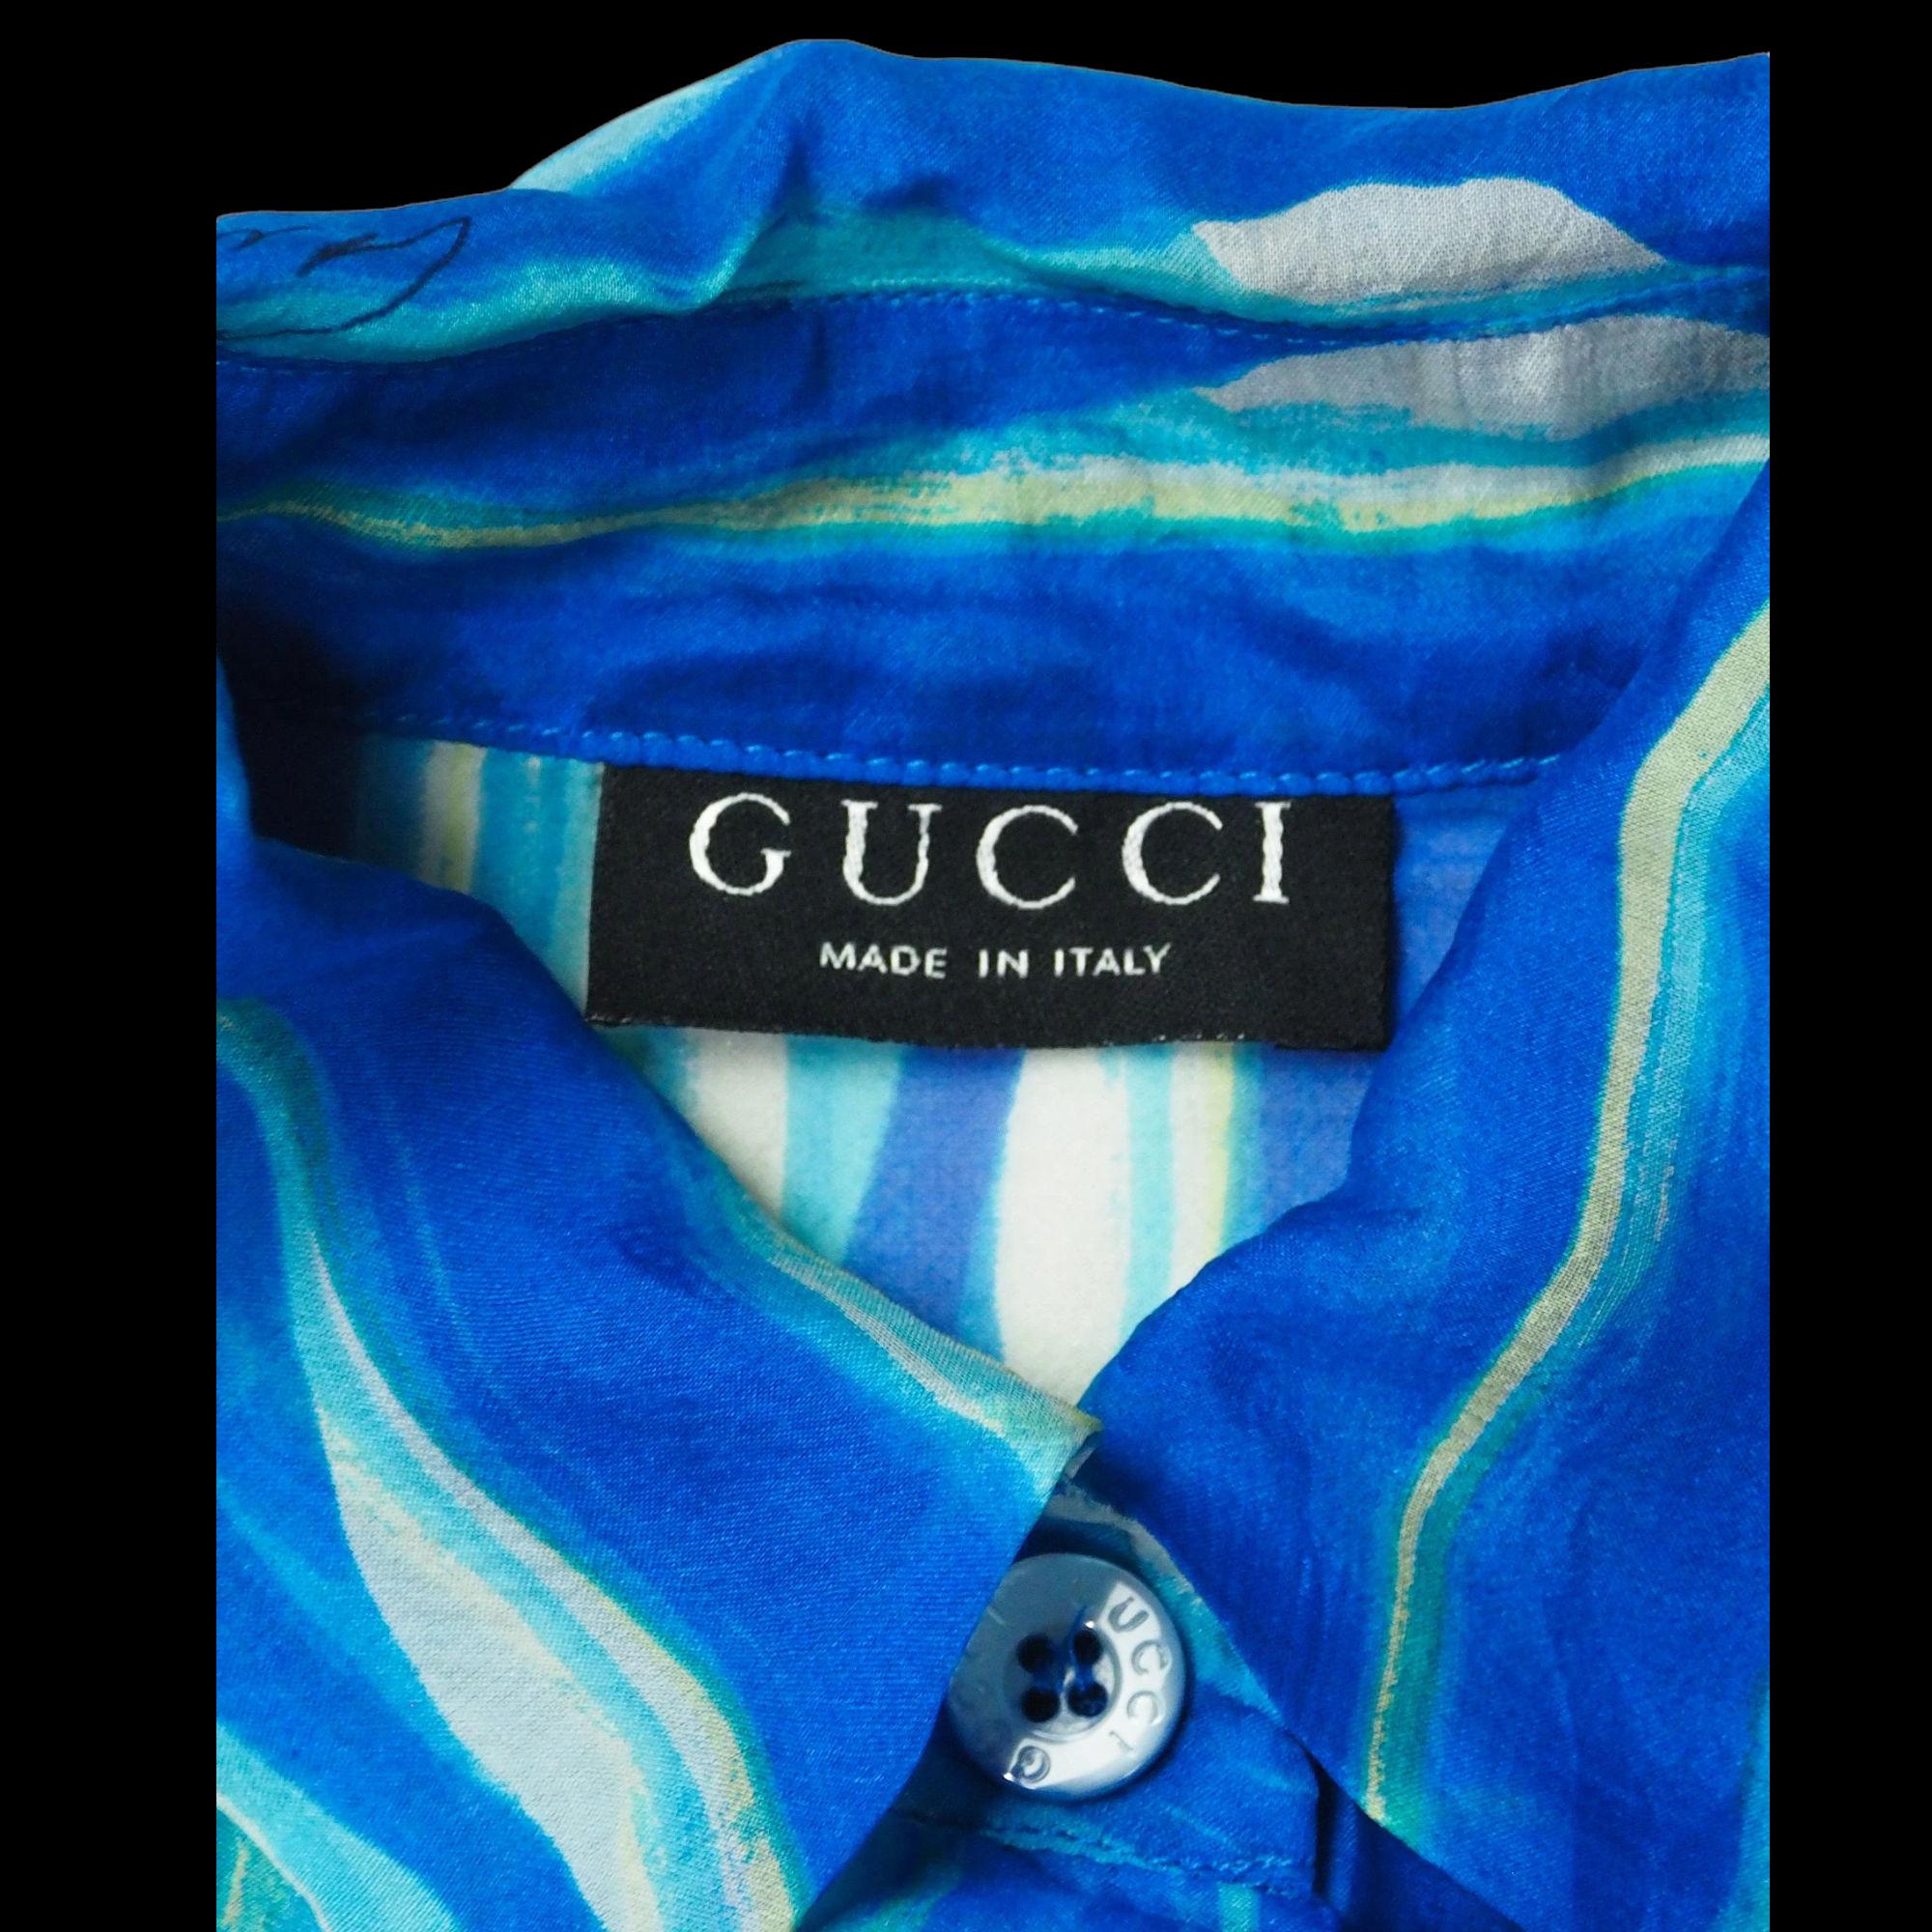 GUCCI S/S 1996 by Tom Ford Abstract Colour Printed Silk Sheer Shirt For Sale 8